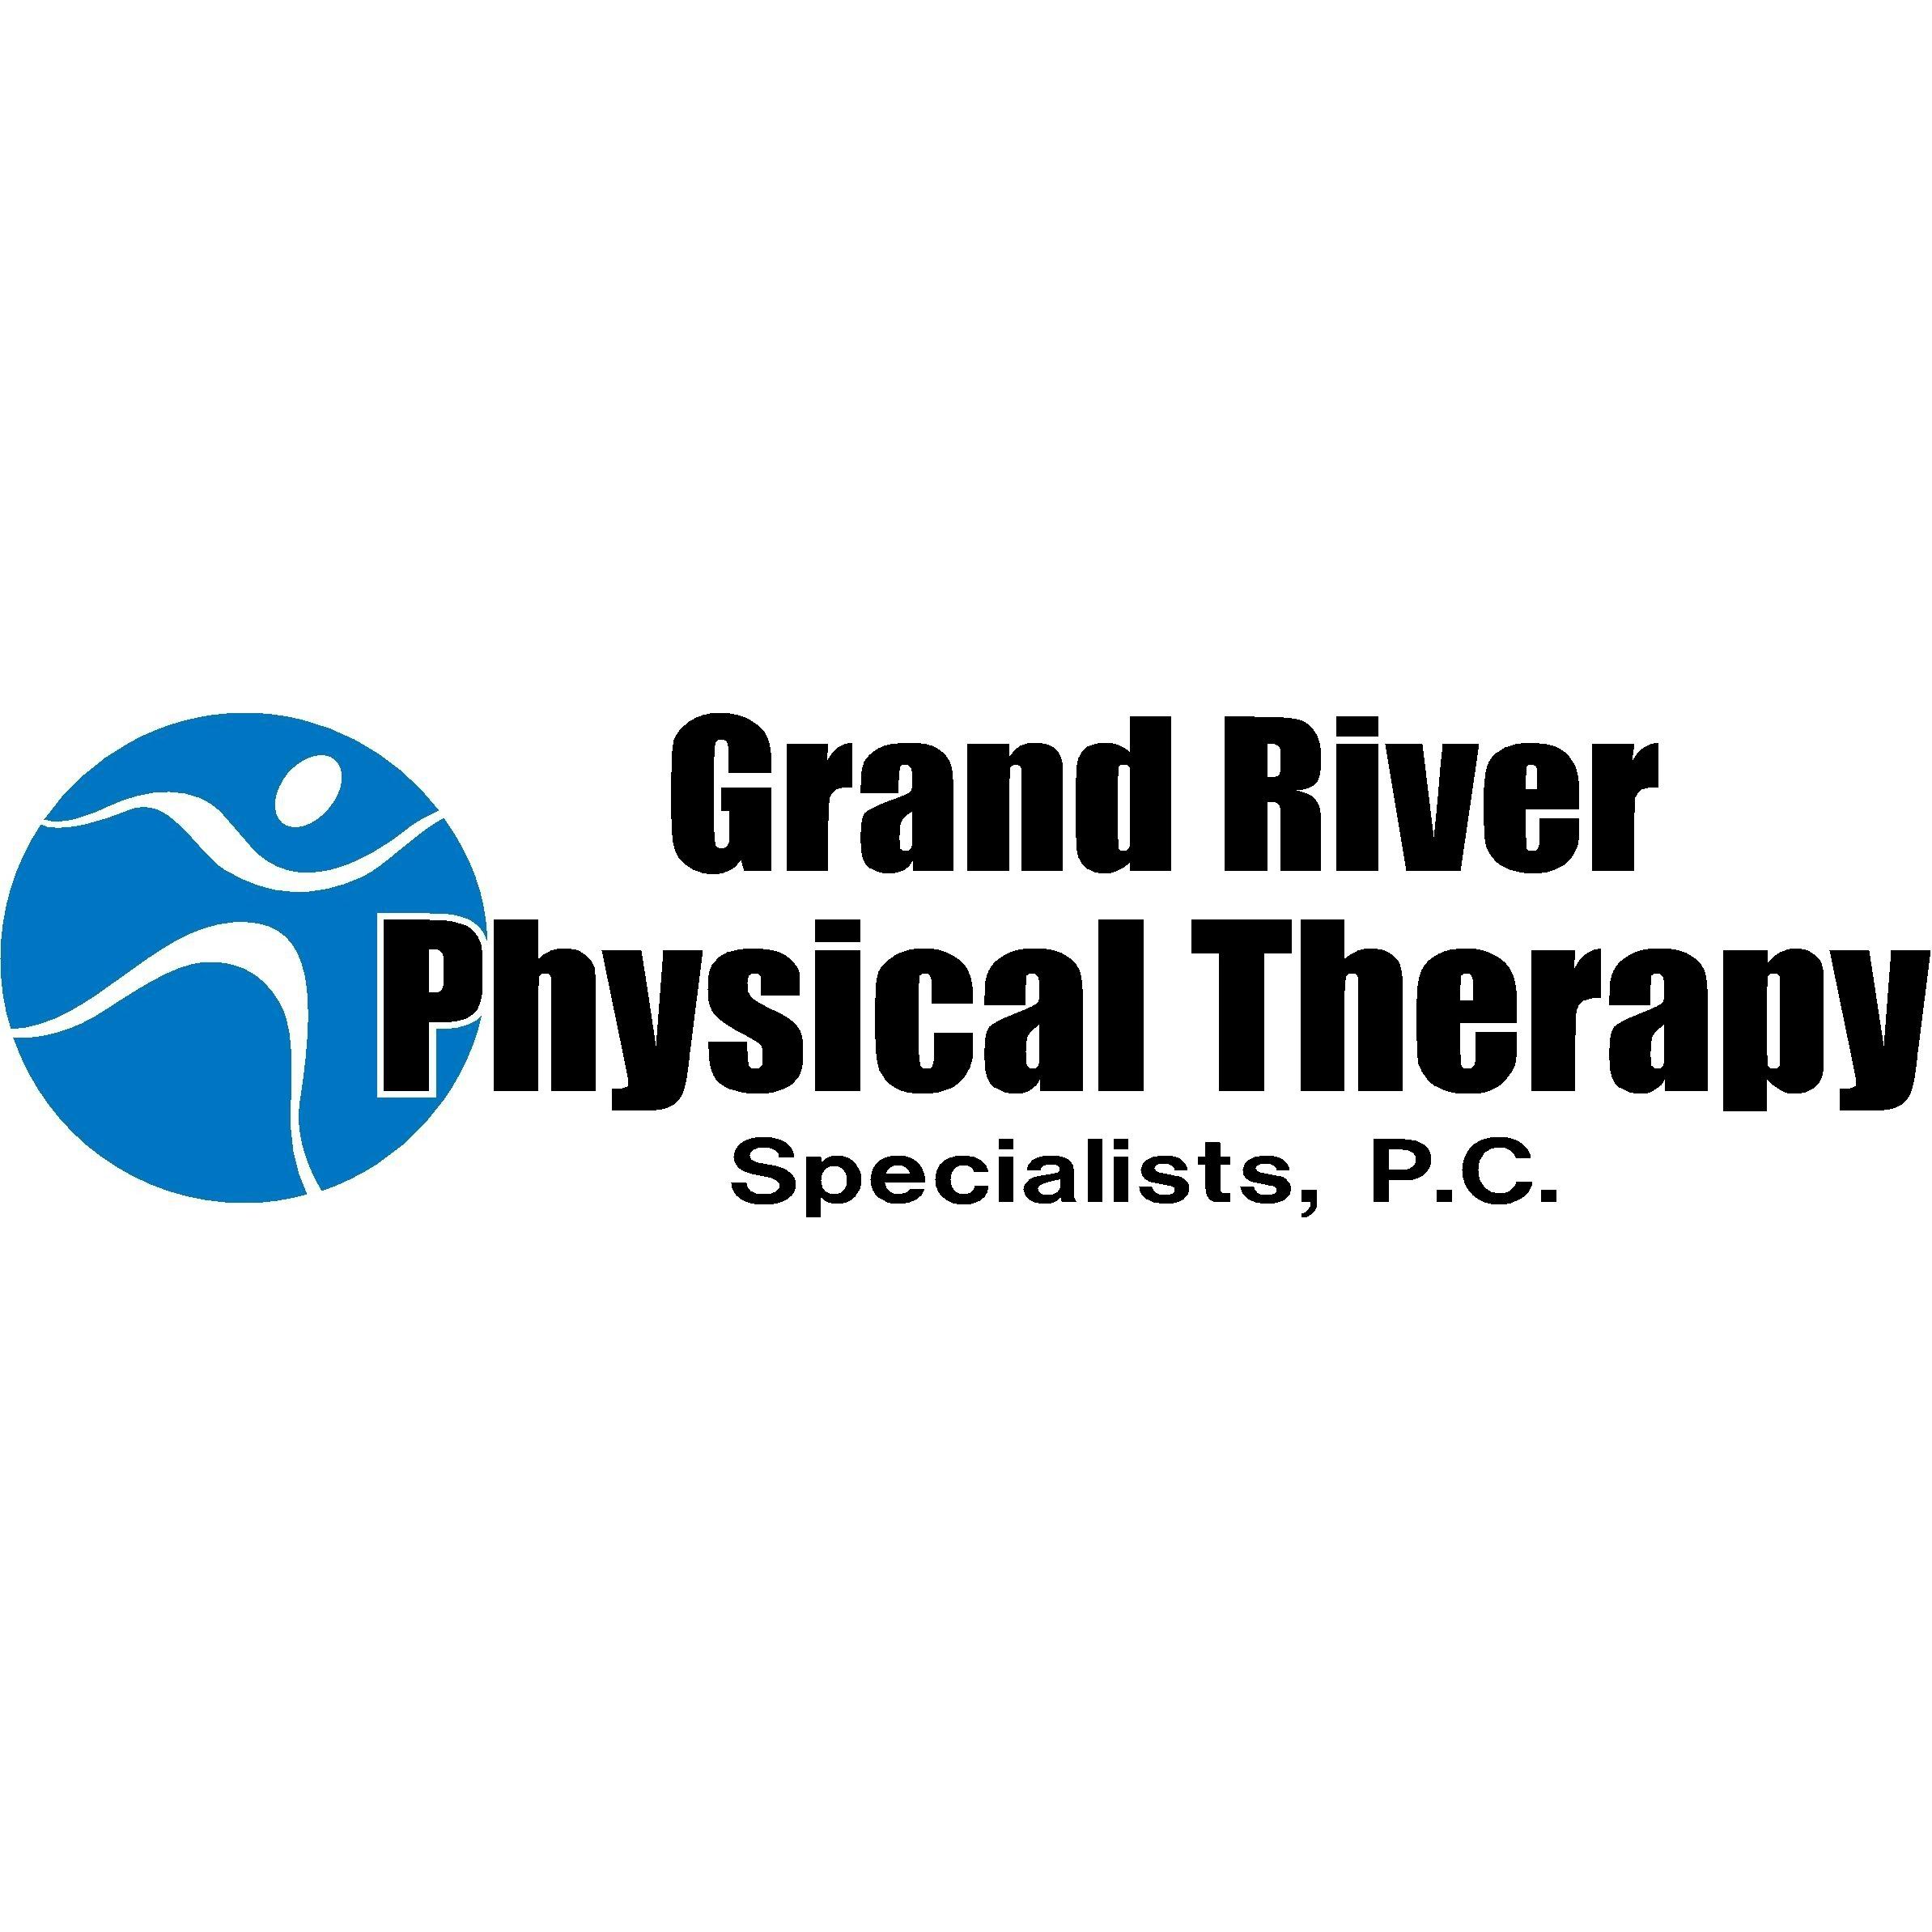 Grand River Physical Therapy Specialists, P.C. Logo